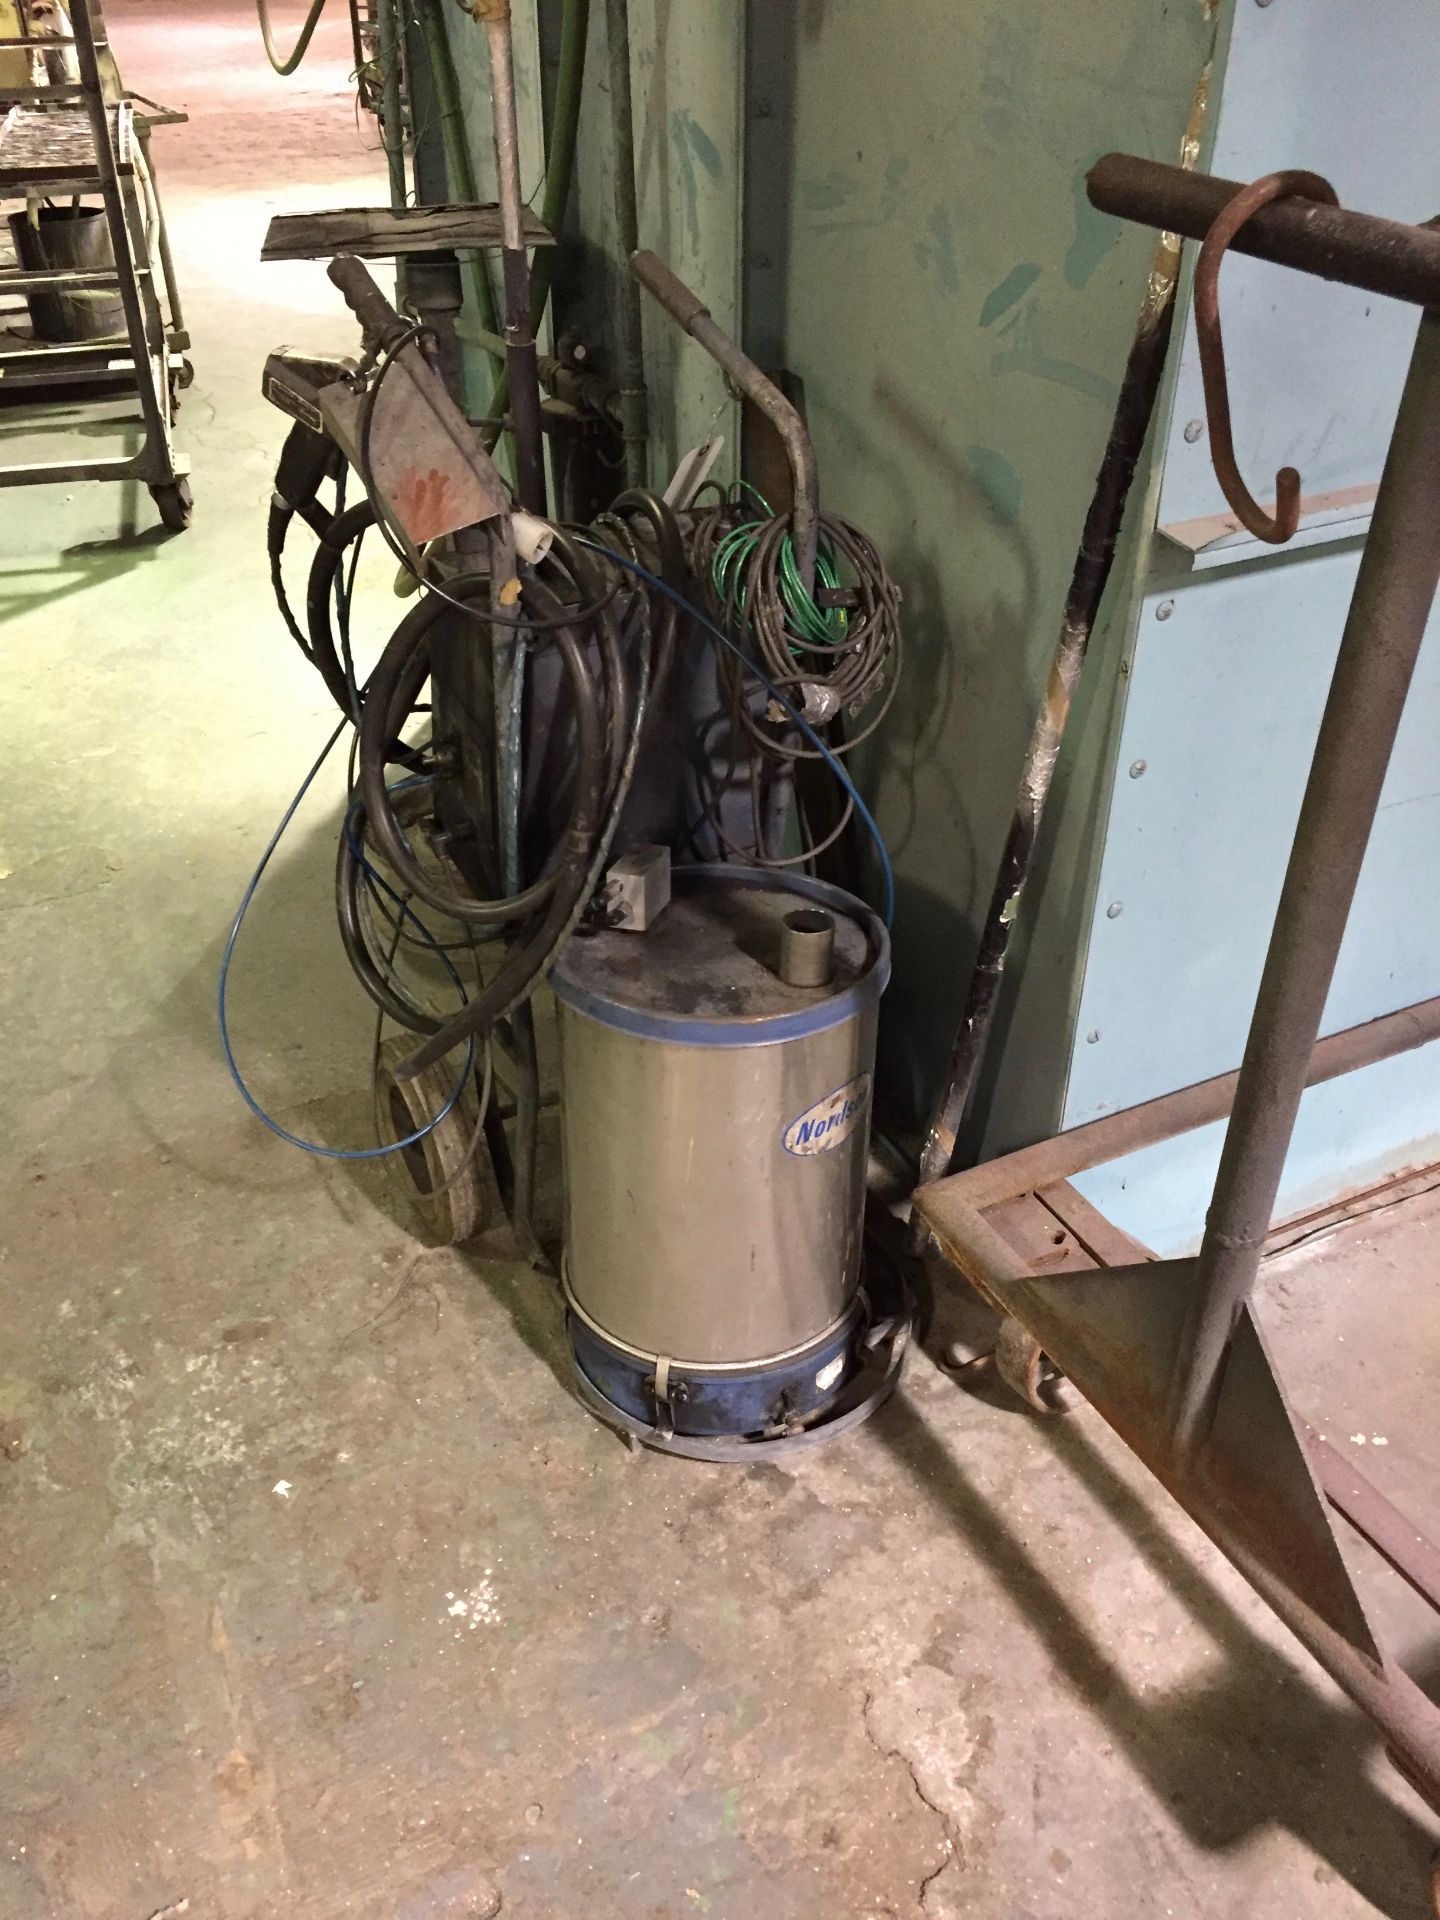 Nordson 100 Spray System, with Hose and Spray Nozzle. | Rigging/Loading Fee: $50 - Image 2 of 6